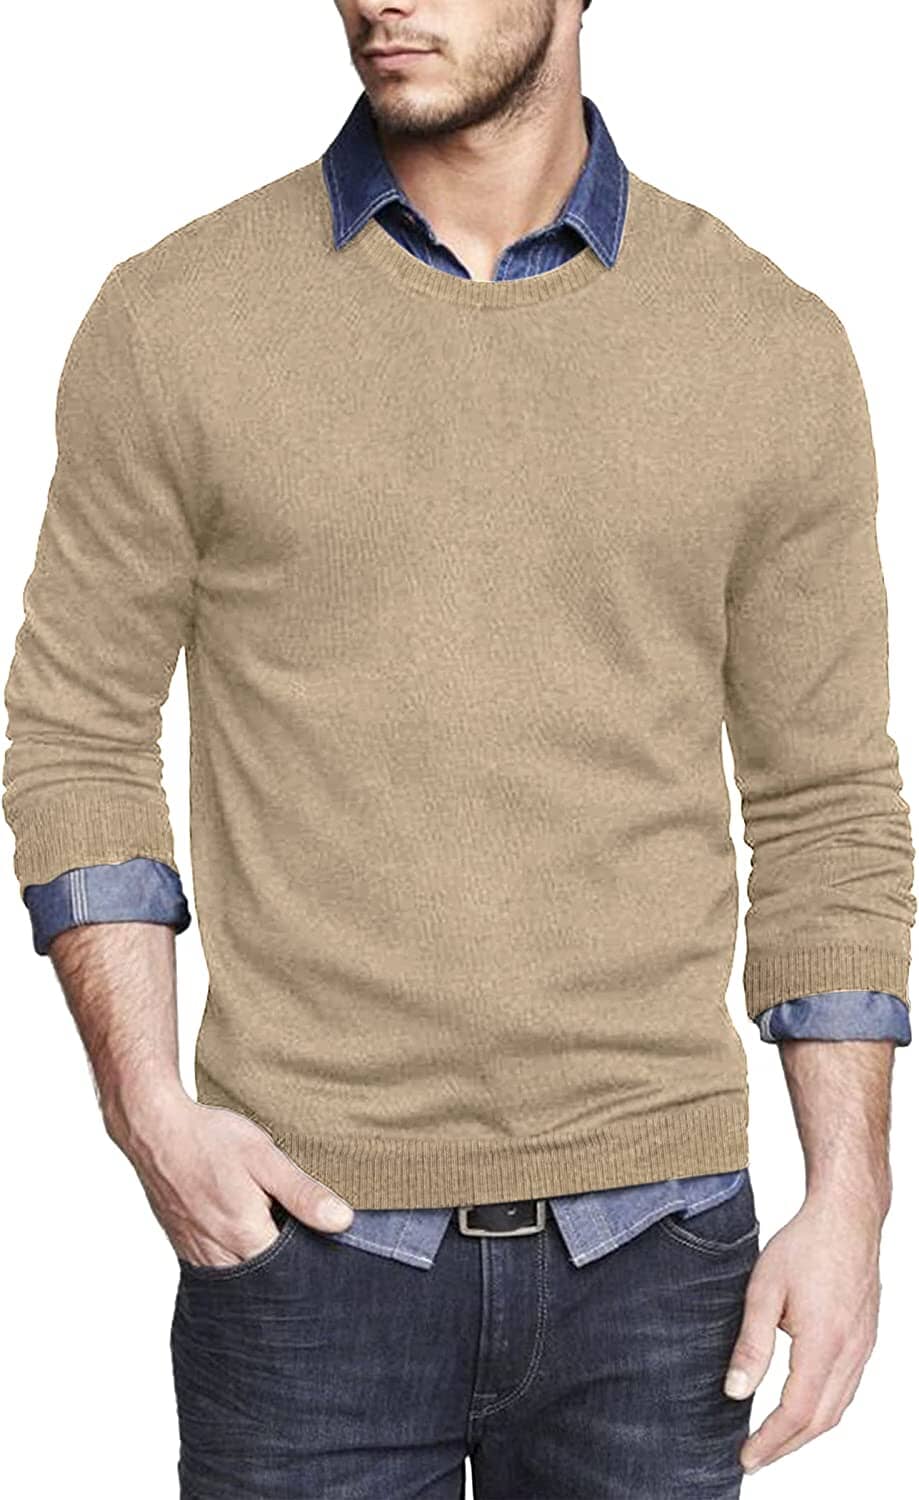 Solid Classic Crew Neck Sweater (US Only) Sweaters COOFANDY Store Khaki S 